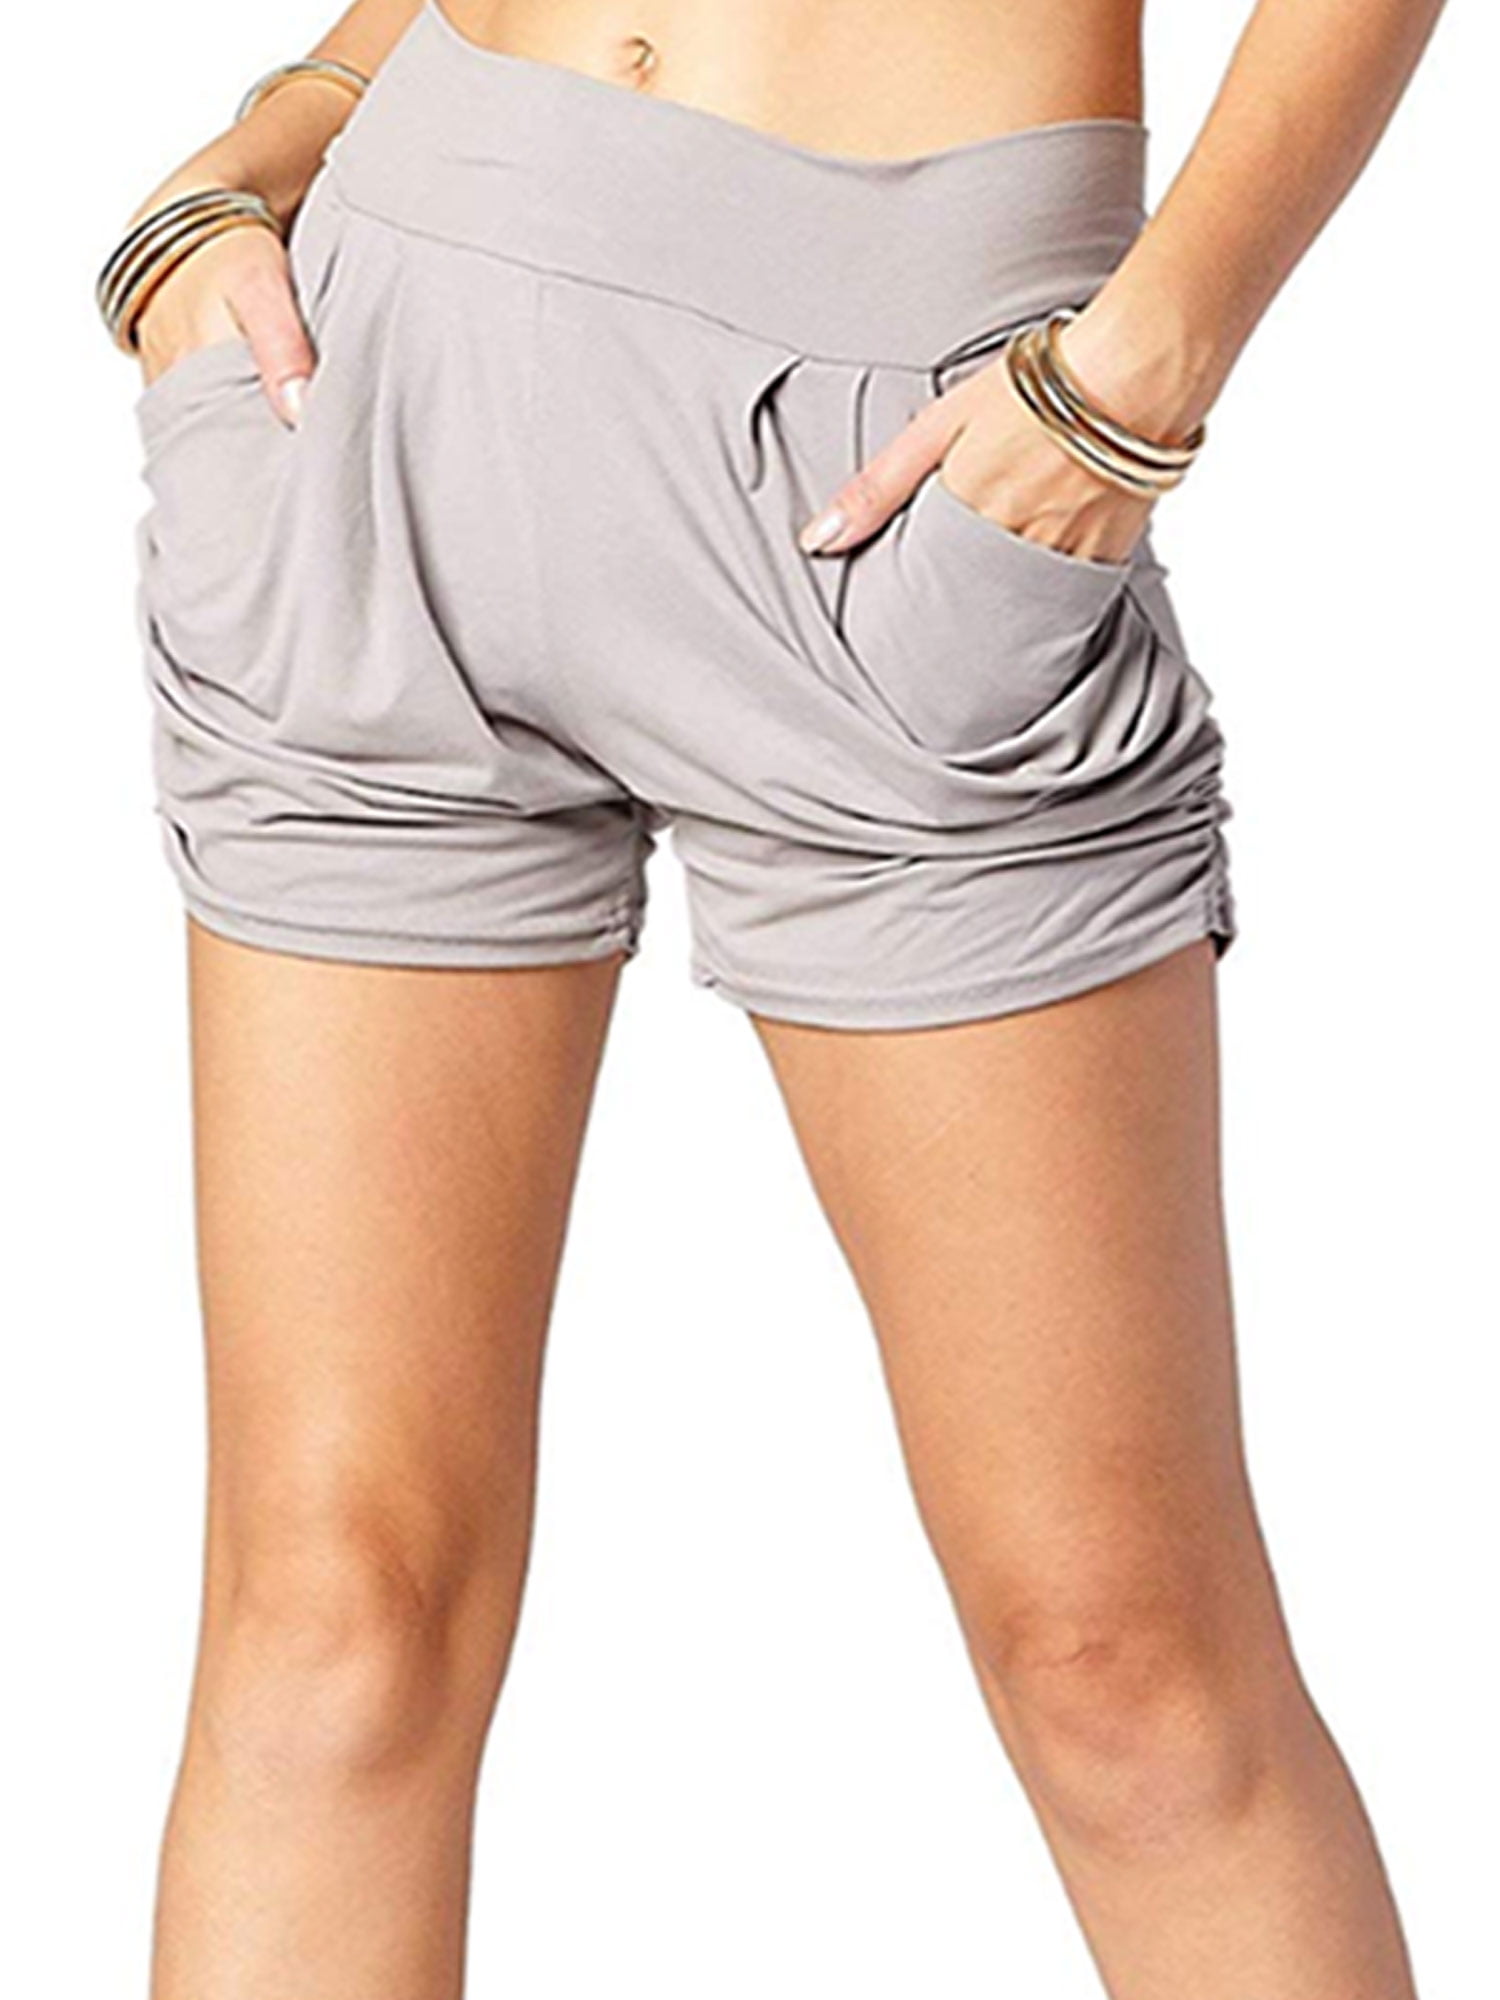 20 Conceited Premium Ultra Soft Harem Shorts with Pockets